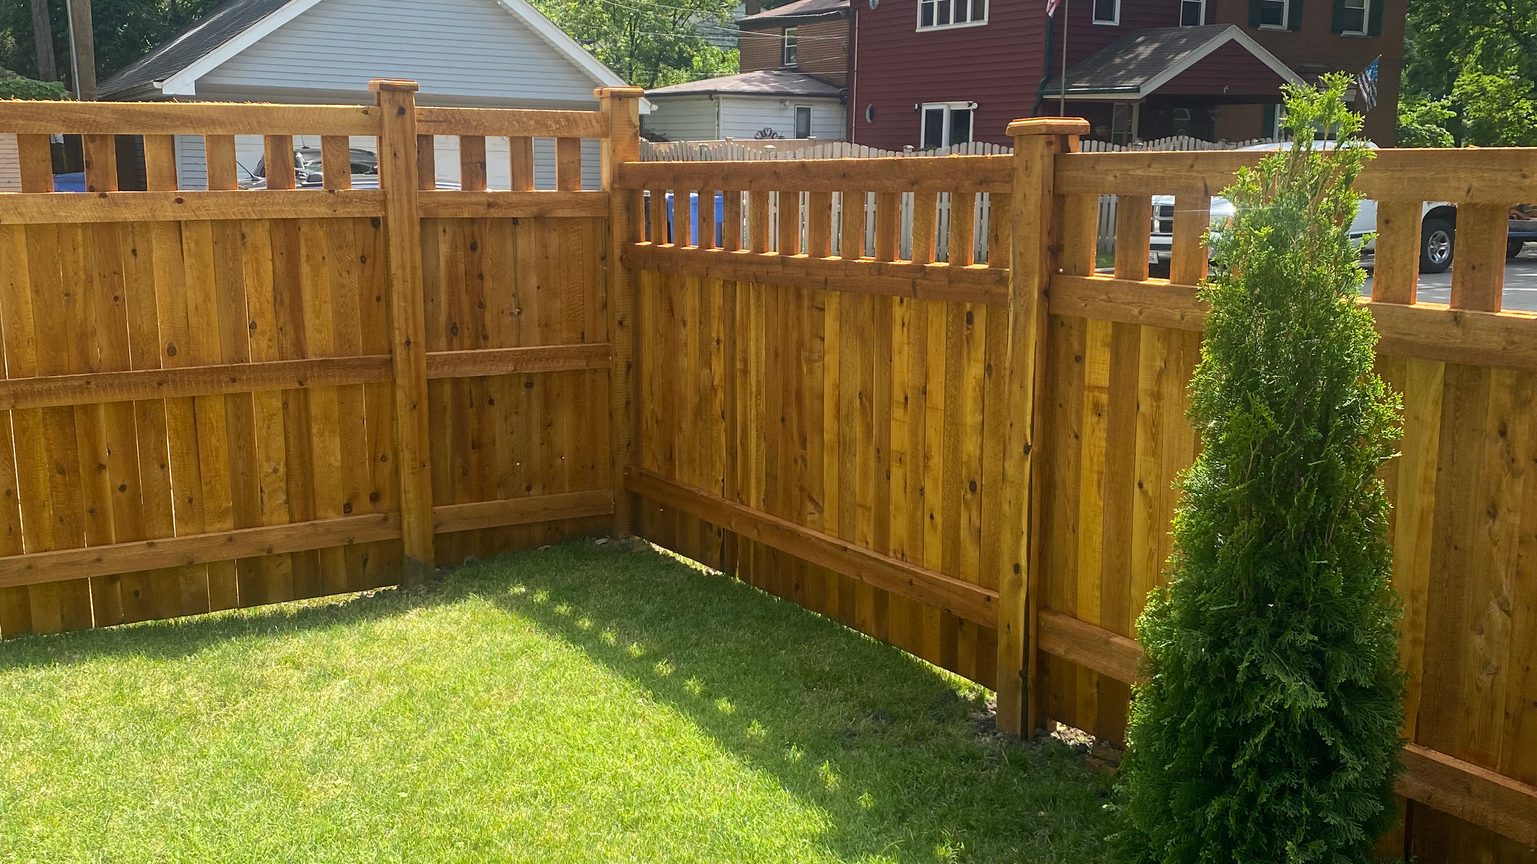 These 5x5 heartwood posts will help this new fence (cedar) last 10+ years